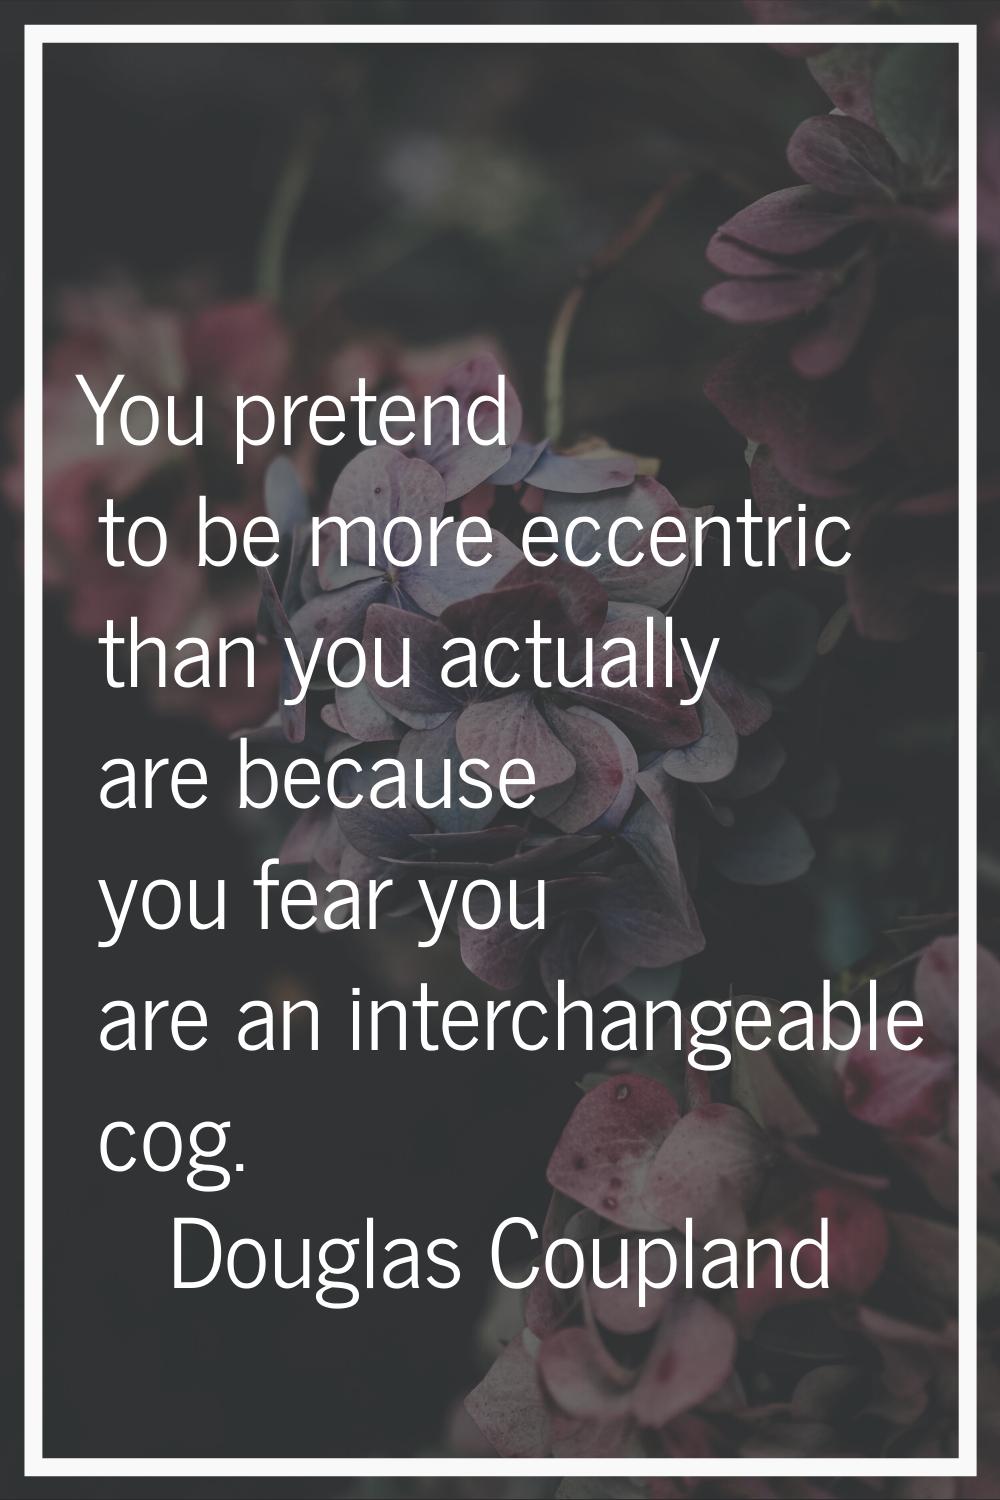 You pretend to be more eccentric than you actually are because you fear you are an interchangeable 